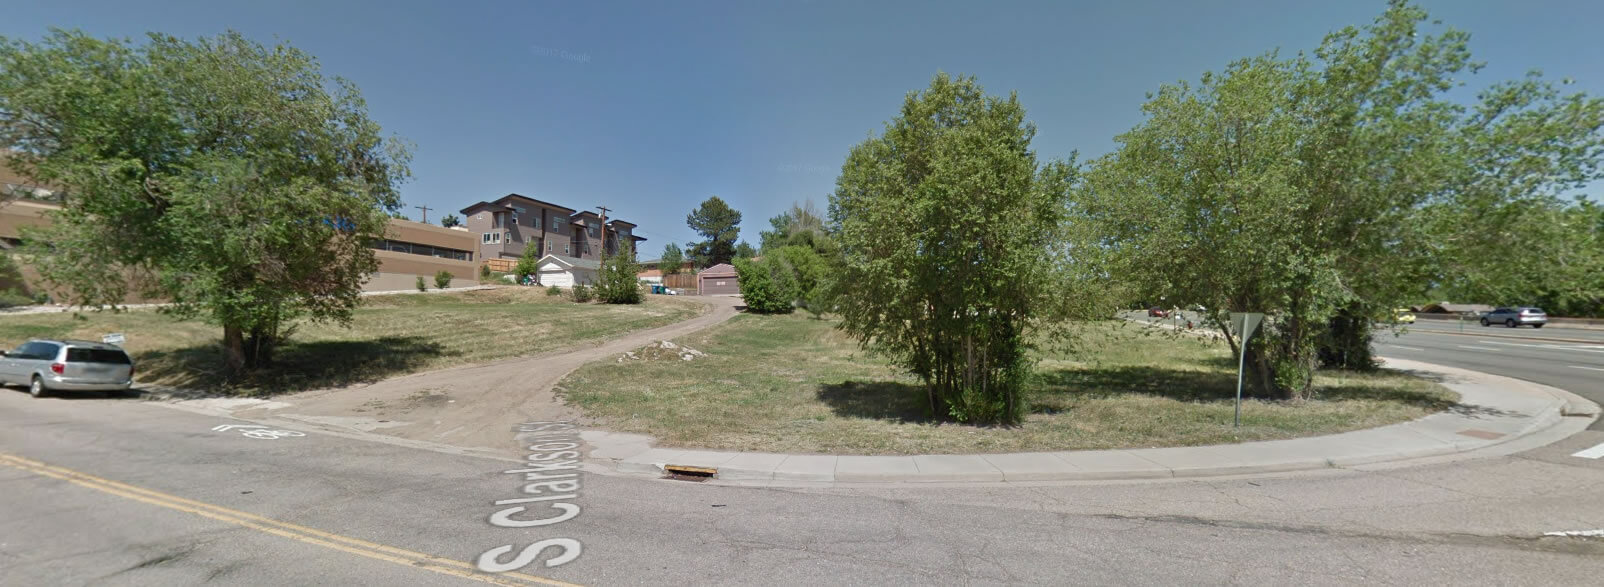 Just Sold: Englewood Opportunity Zone Development Site